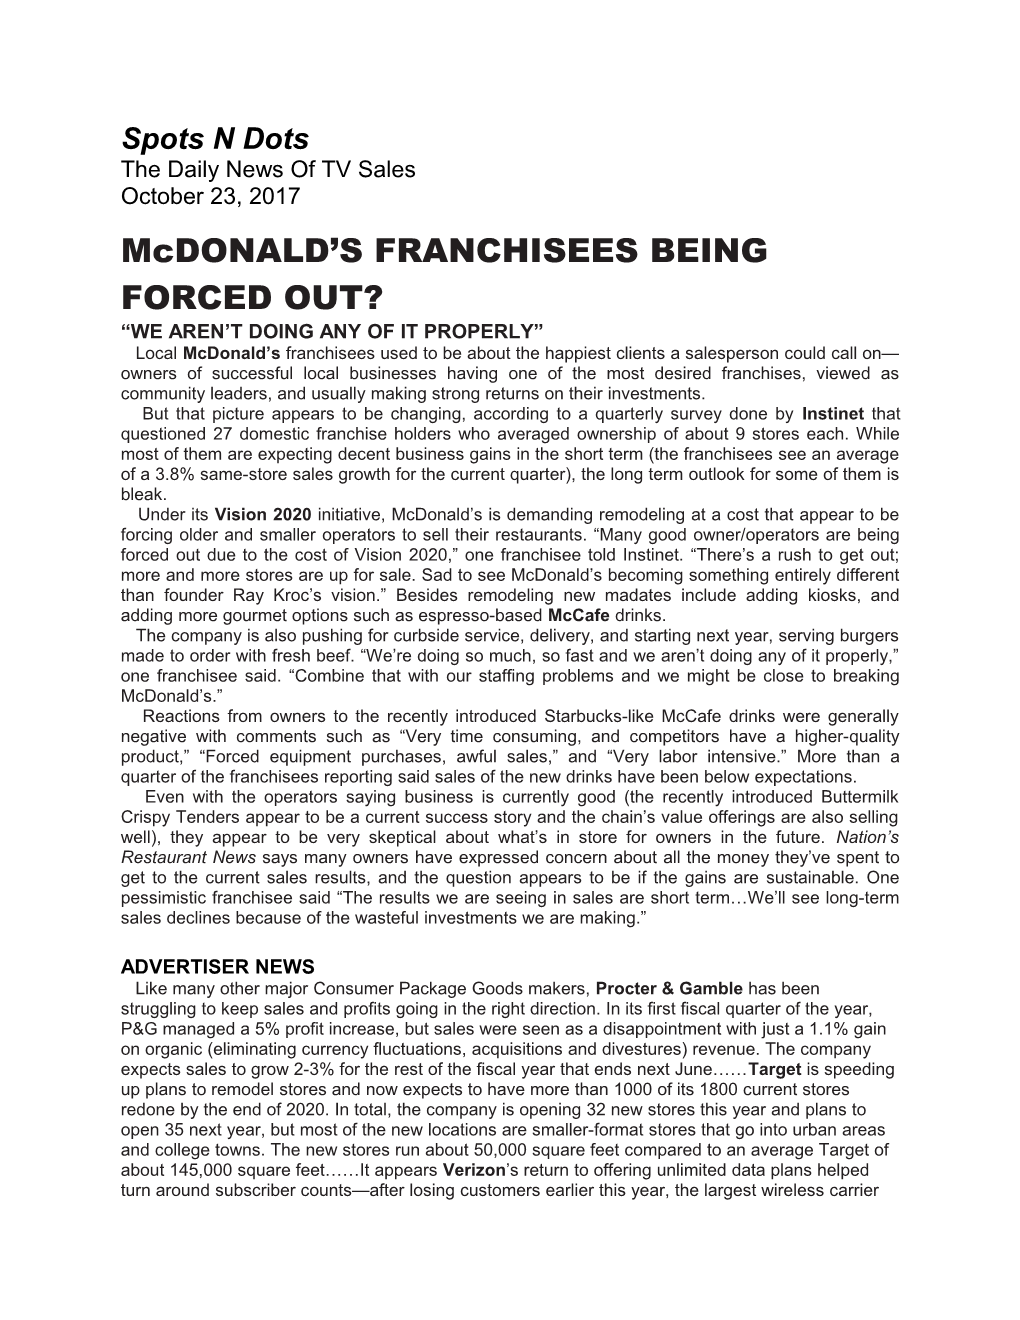 Mcdonald S FRANCHISEES BEING FORCED OUT?